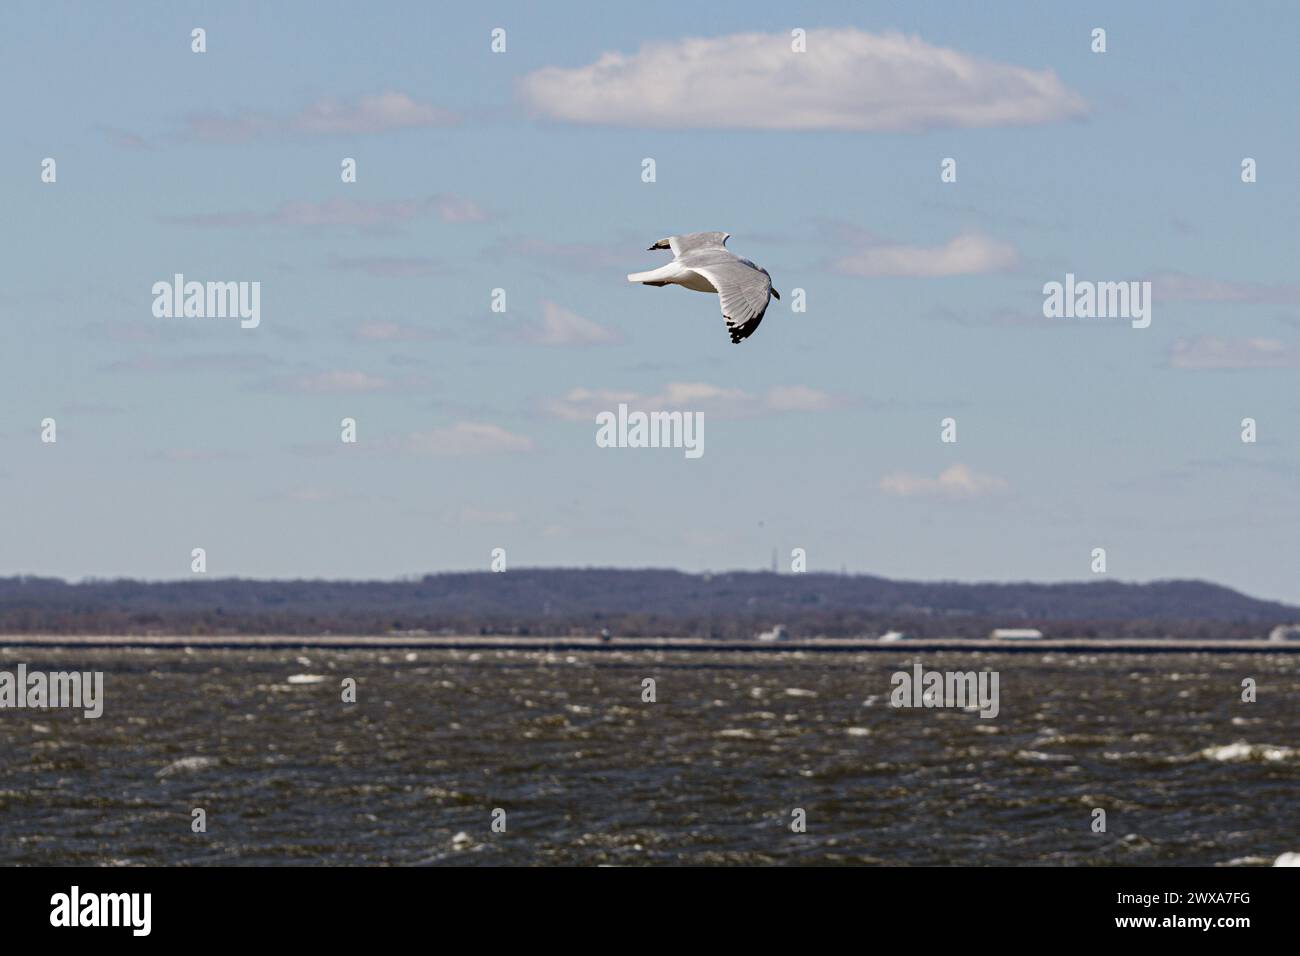 A white bird soaring above water with land in the background Stock Photo